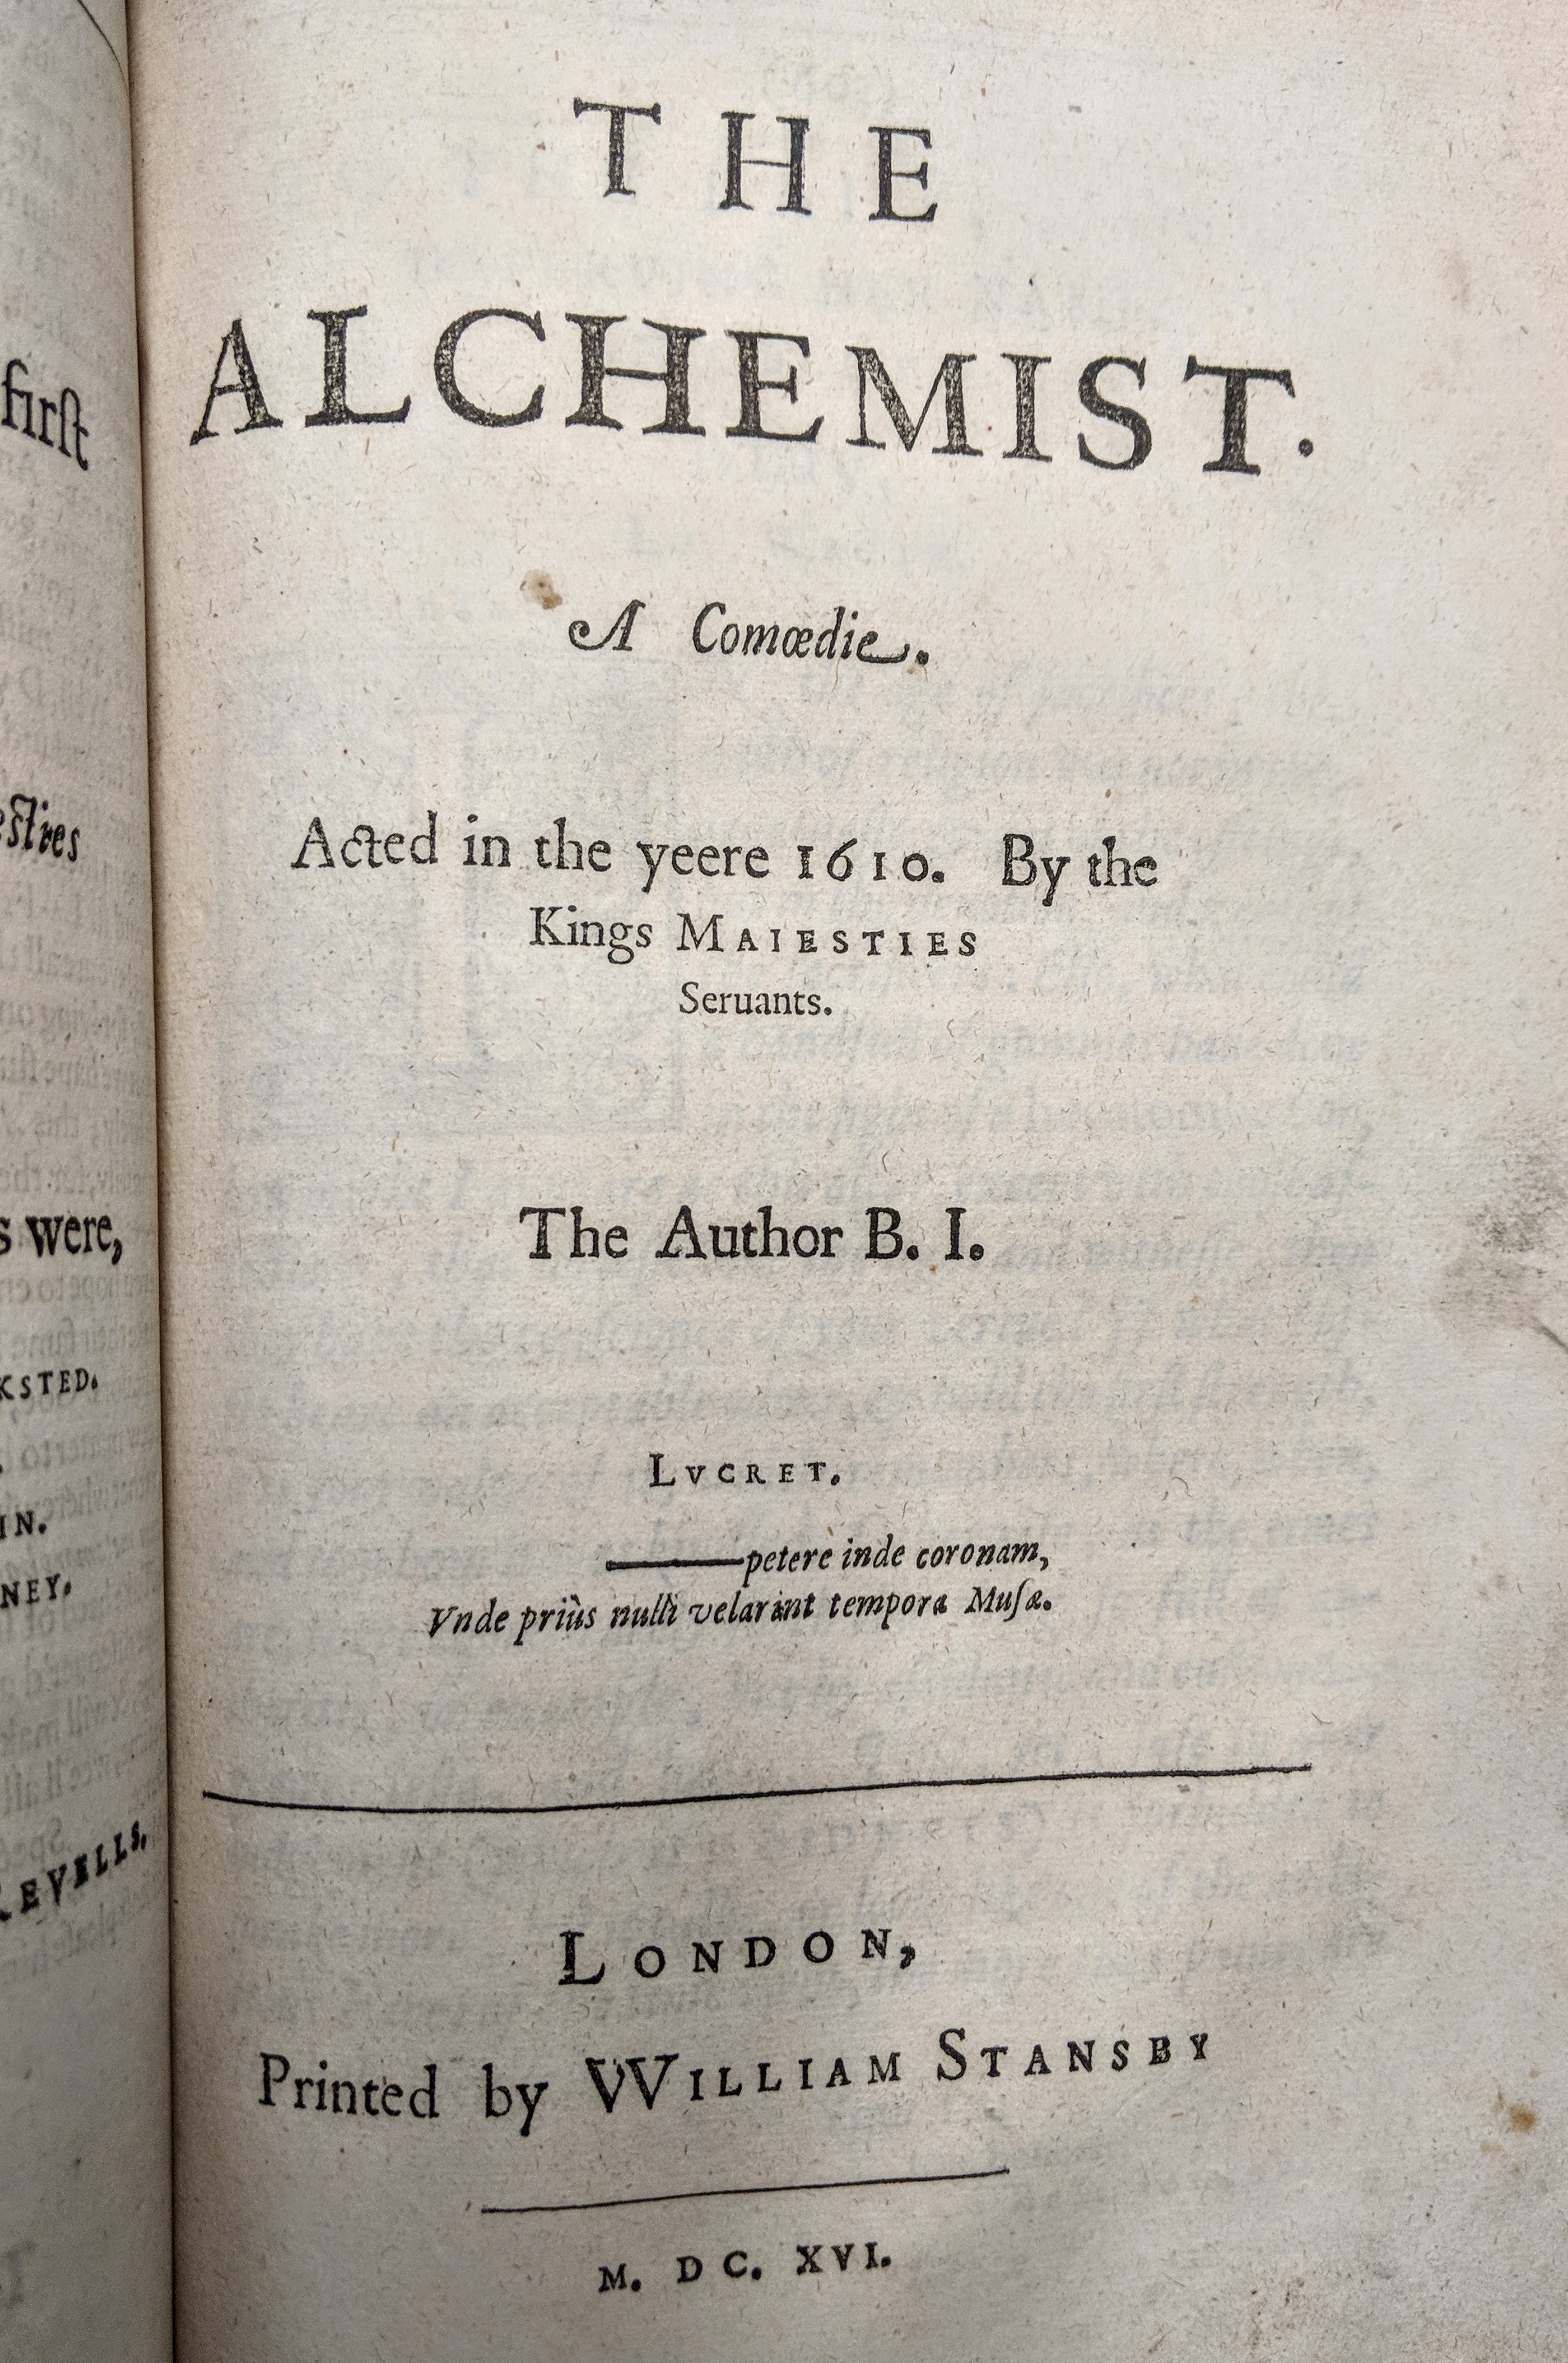 Title page from 'The Alchemist' by Ben Jonson in Jonson's First Folio of 1616.